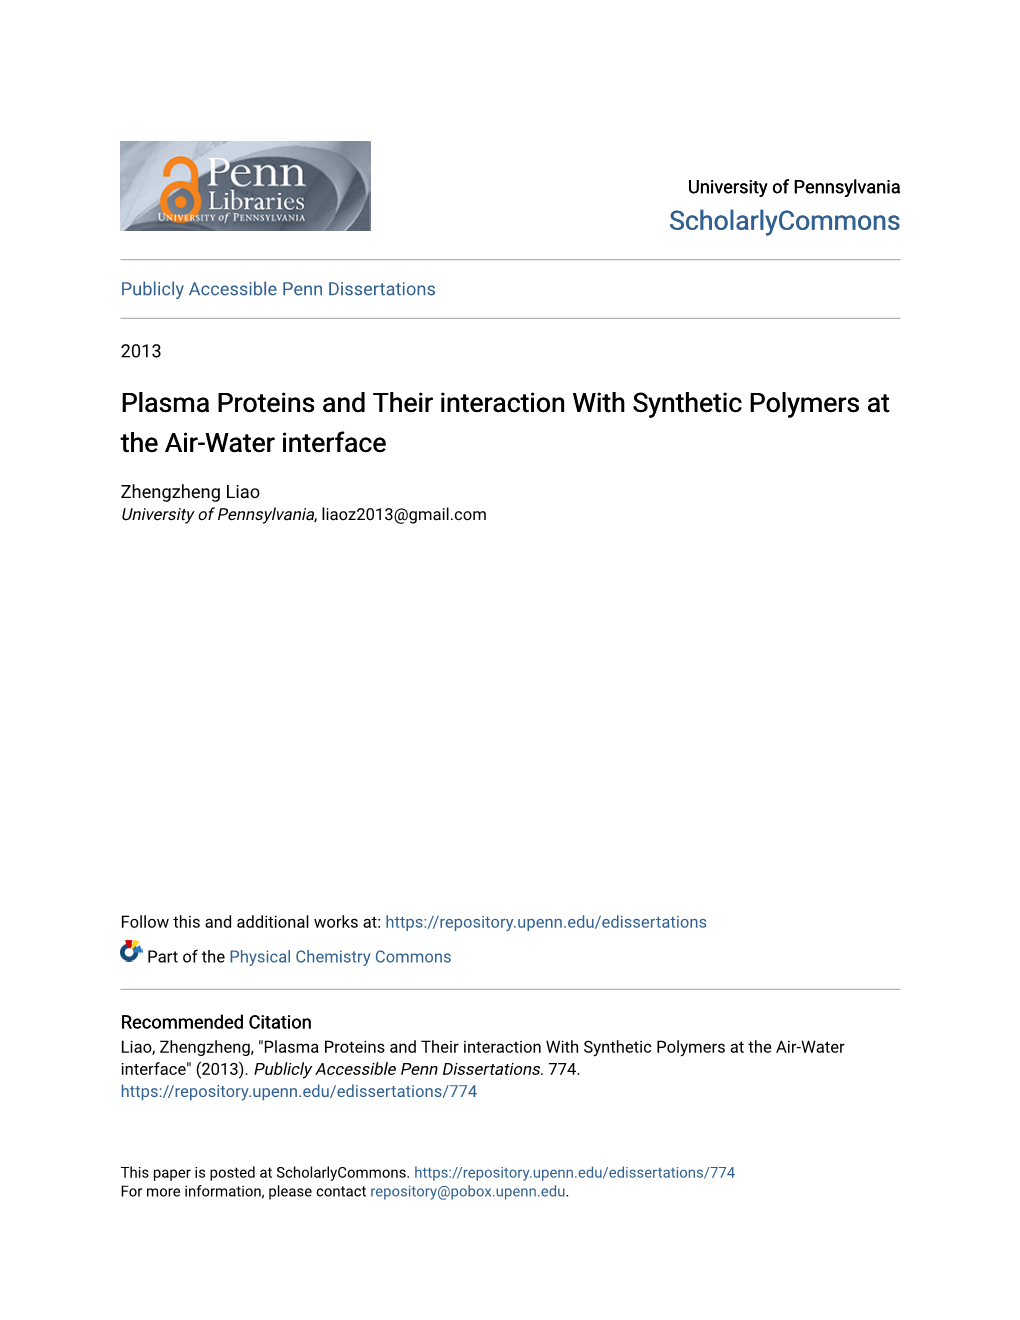 Plasma Proteins and Their Interaction with Synthetic Polymers at the Air-Water Interface